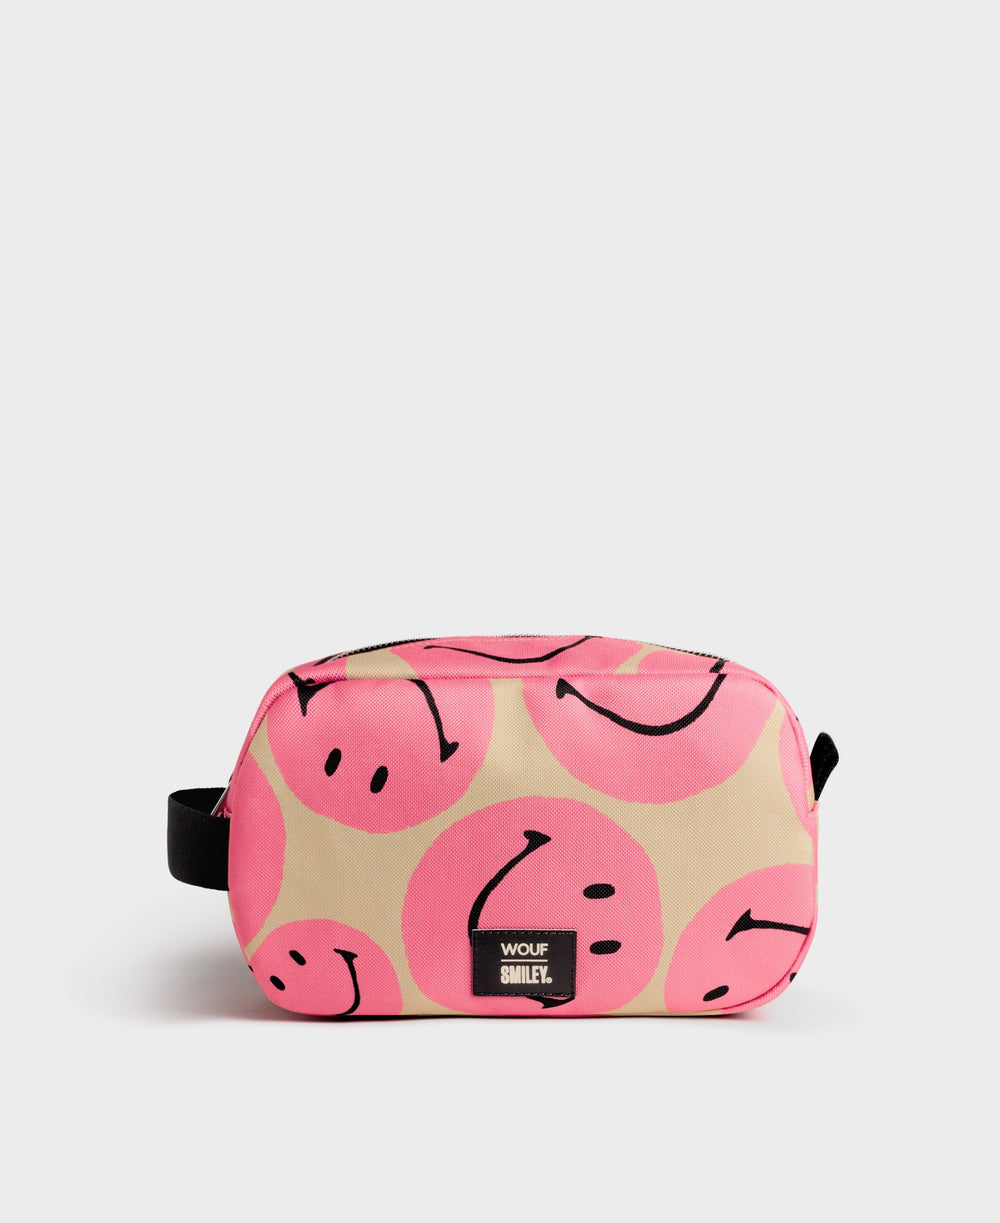 Large Pink Smiley® Toiletry Bag